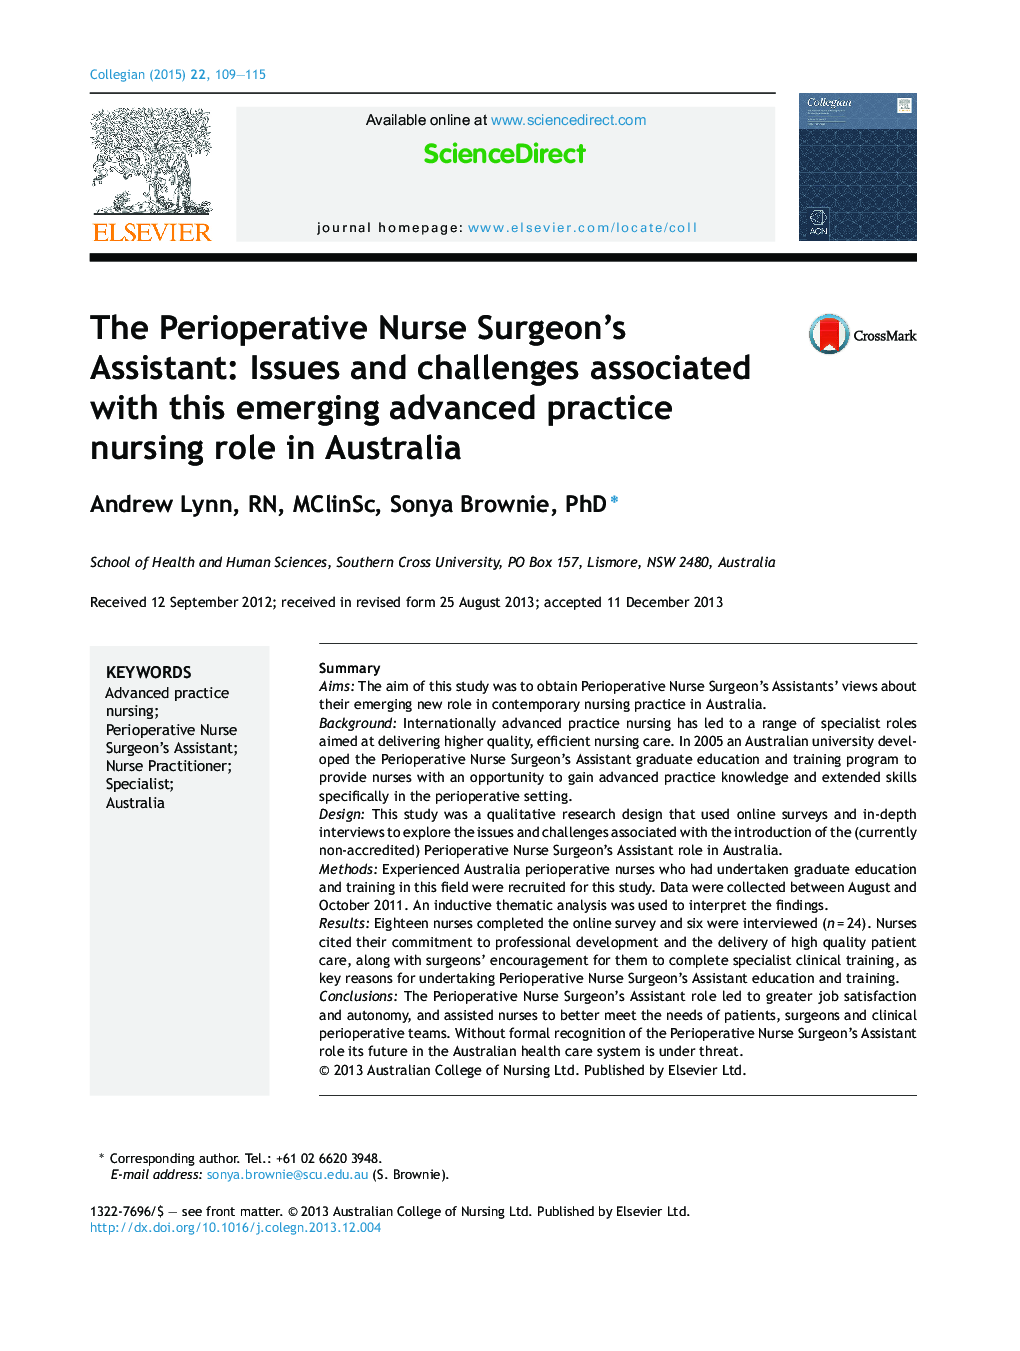 The Perioperative Nurse Surgeon's Assistant: Issues and challenges associated with this emerging advanced practice nursing role in Australia